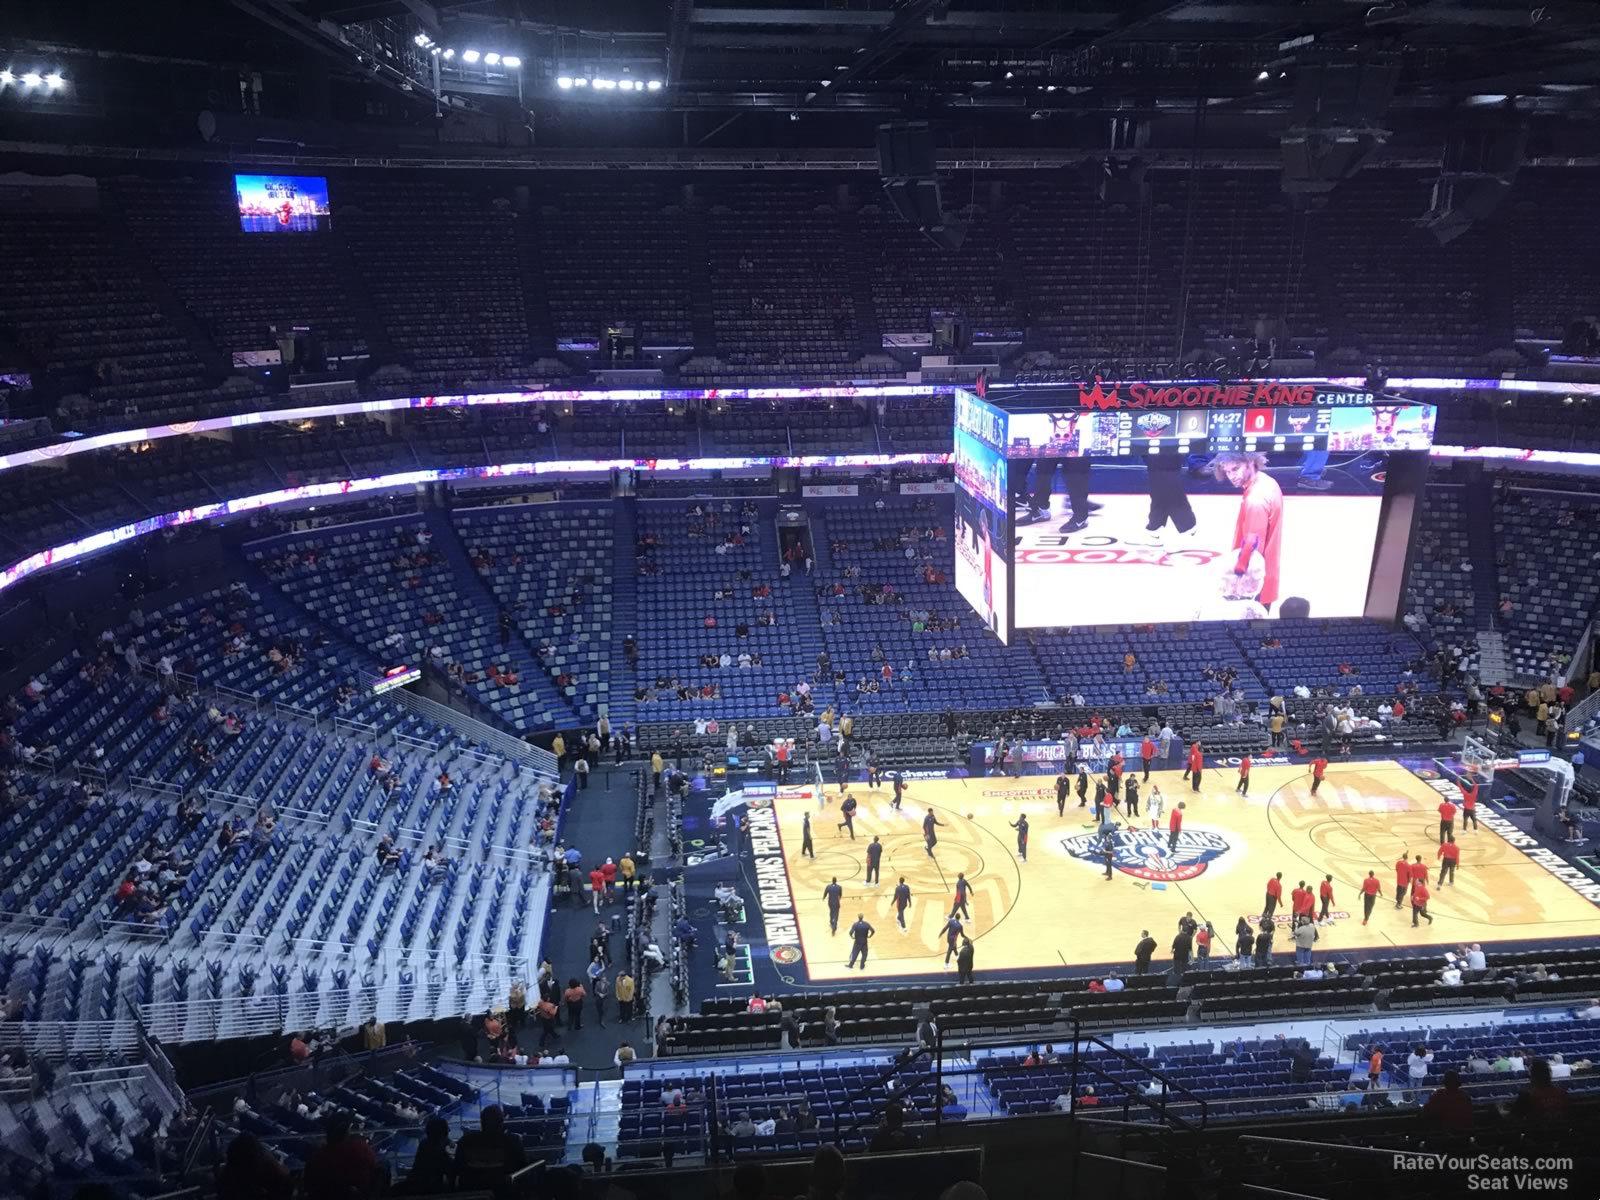 section 302, row 16 seat view  for basketball - smoothie king center